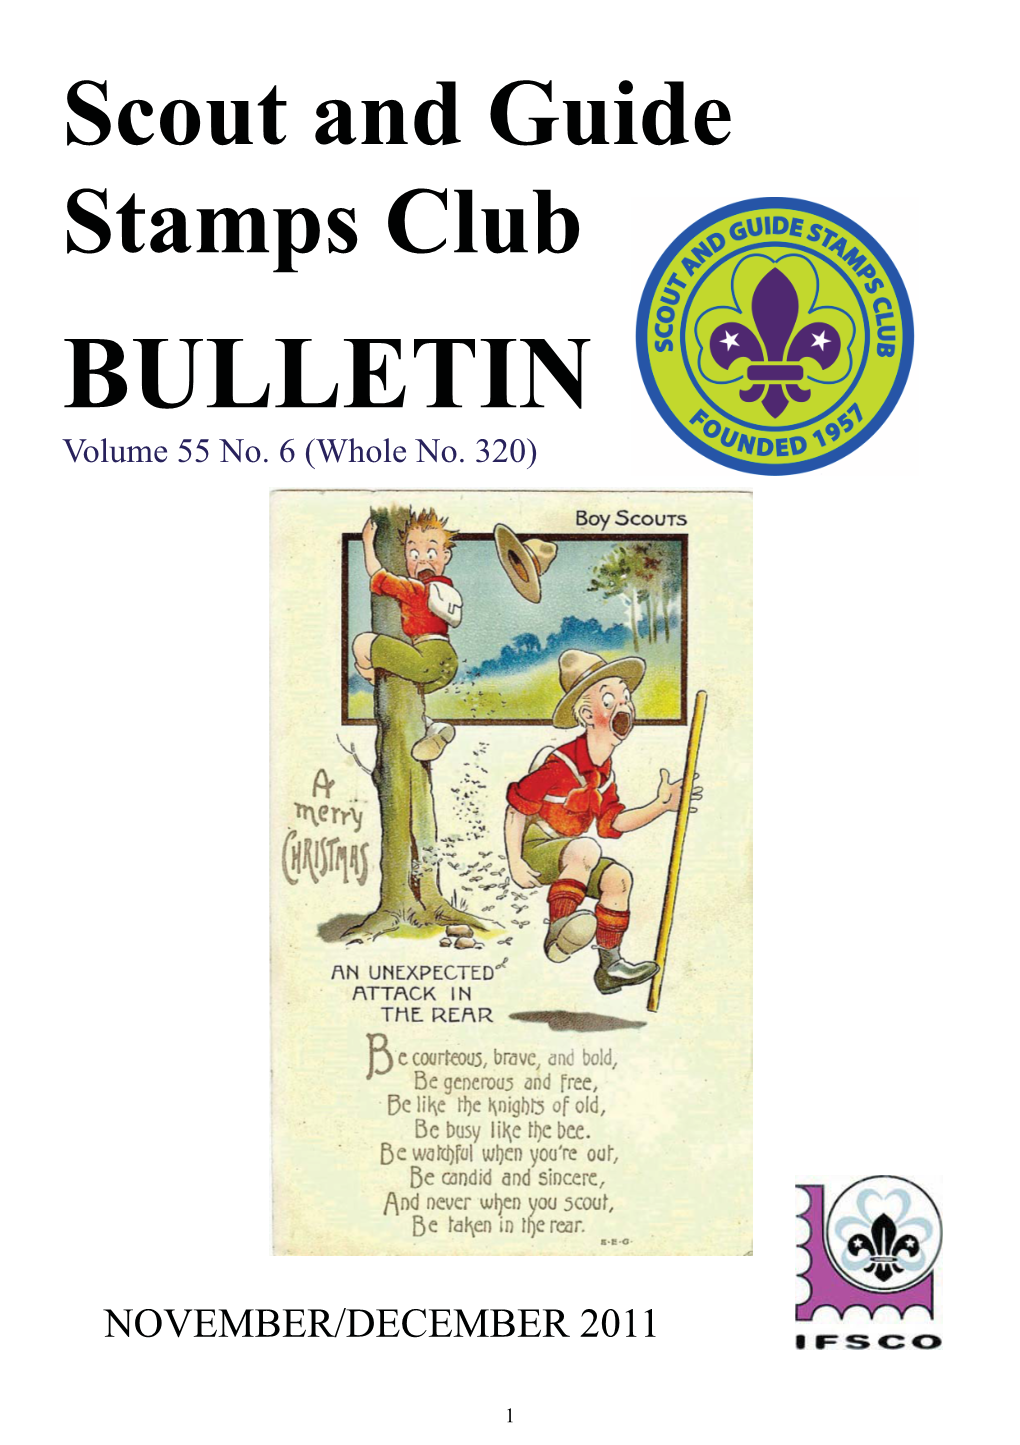 Scout and Guide Stamps Club BULLETIN #320